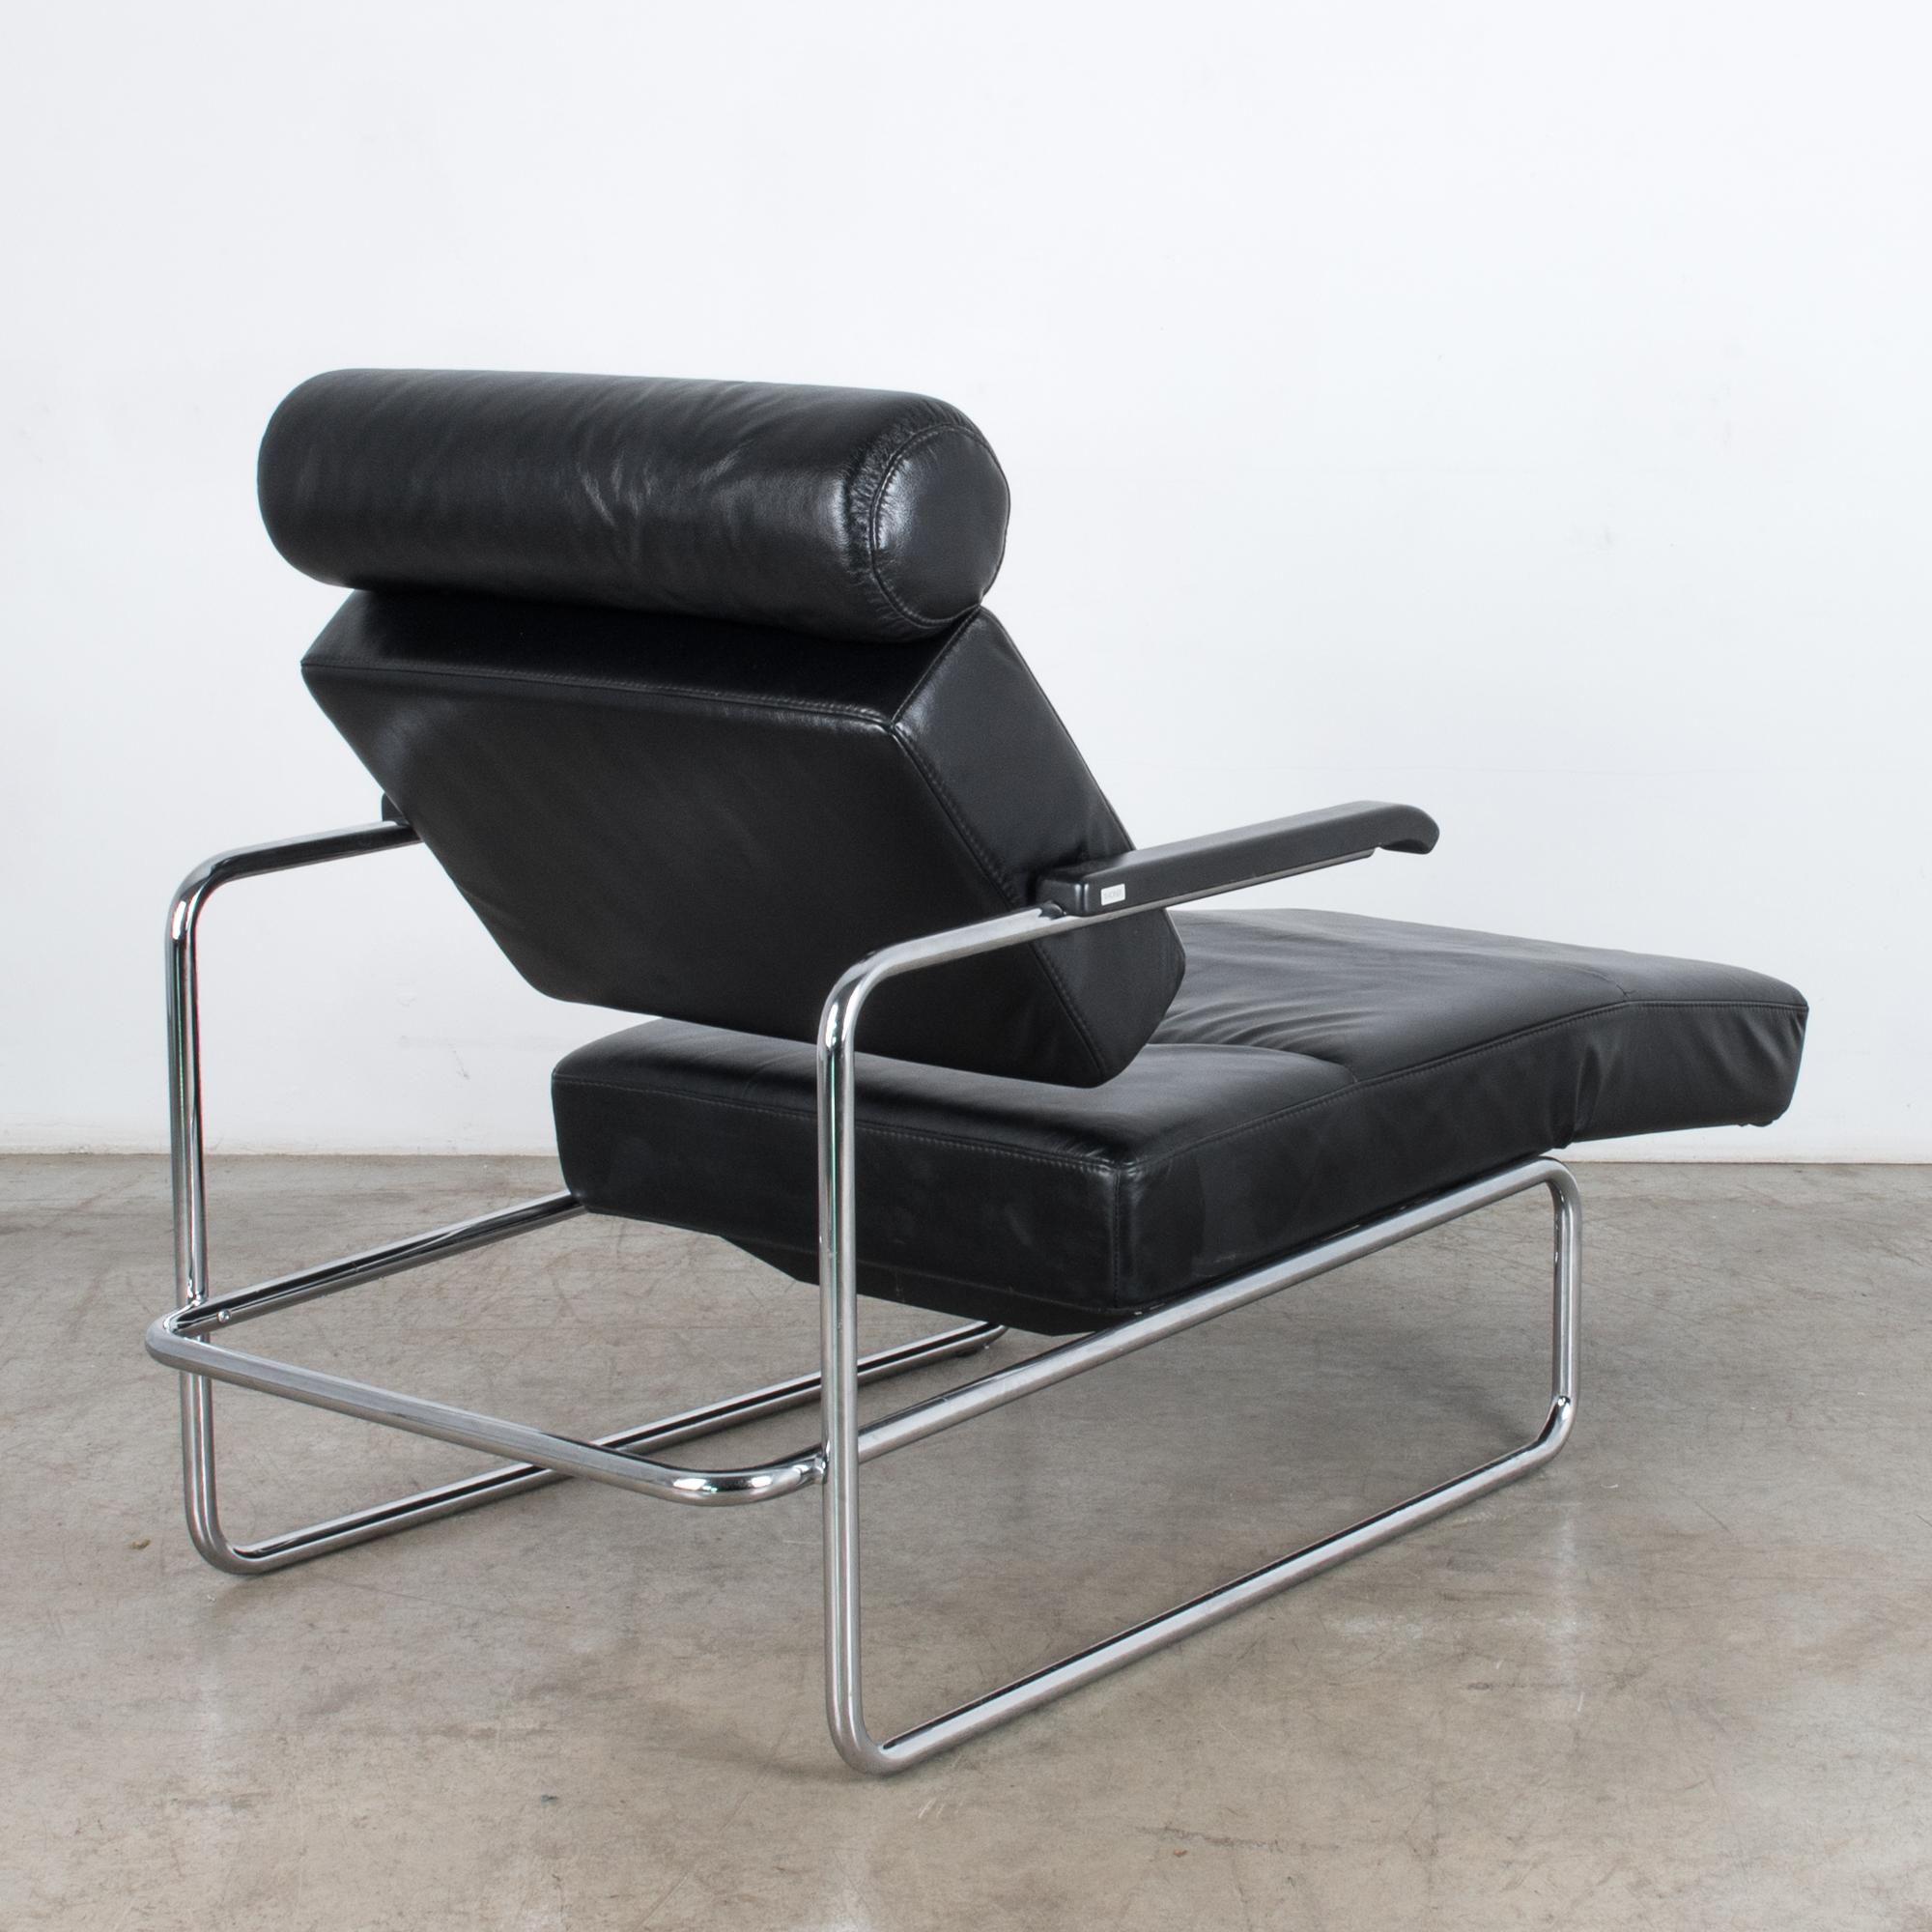 1970s Black Leather Thonet Adjustable Leather Lounge Chair 1